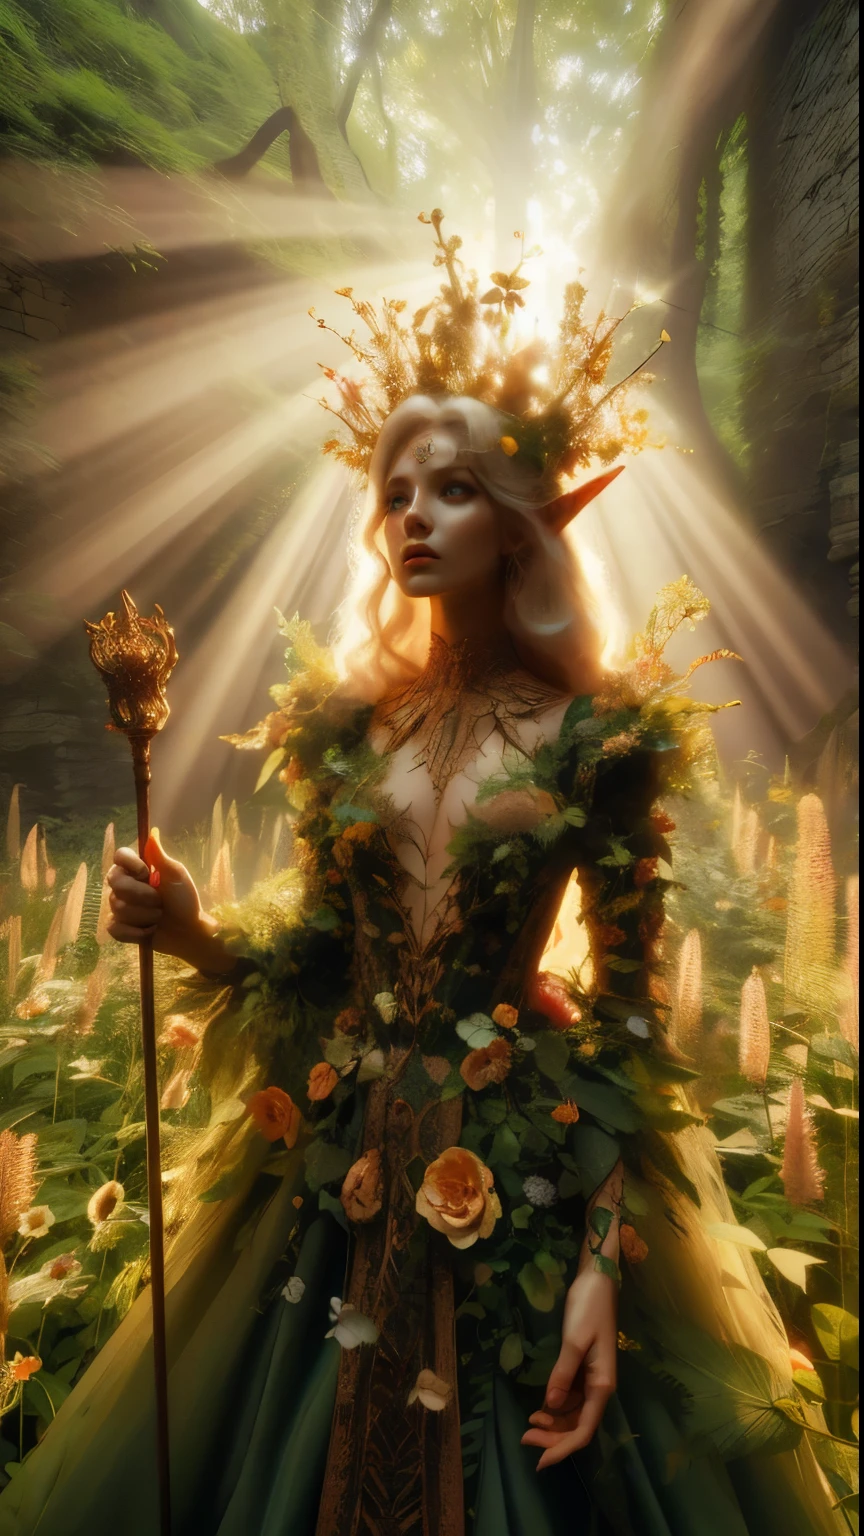 In a dappled, ancient forest ruin, an Elf Princess stands tall close to camera, closeup shot, her scepter raised high as beams of warm sunlight filter through the trees, casting a golden halo around her regal figure. covered in an ultra-multitude of flowers and vines, very tall overgrown wildflower beds surround her, Her beautiful, enchanted clothing shimmers in the soft light, while lush foliage and vines surround her, creating a lush environment. The camera captures a sharp focus on the princess's face, with the rule of thirds composition placing her at the intersection of two diagonals. Shot during the golden hour, the scene exudes an ethereal mood, inviting the viewer to step into this mystical realm., ,fantasy, better_hands, leonardo, angelawhite, Enhance